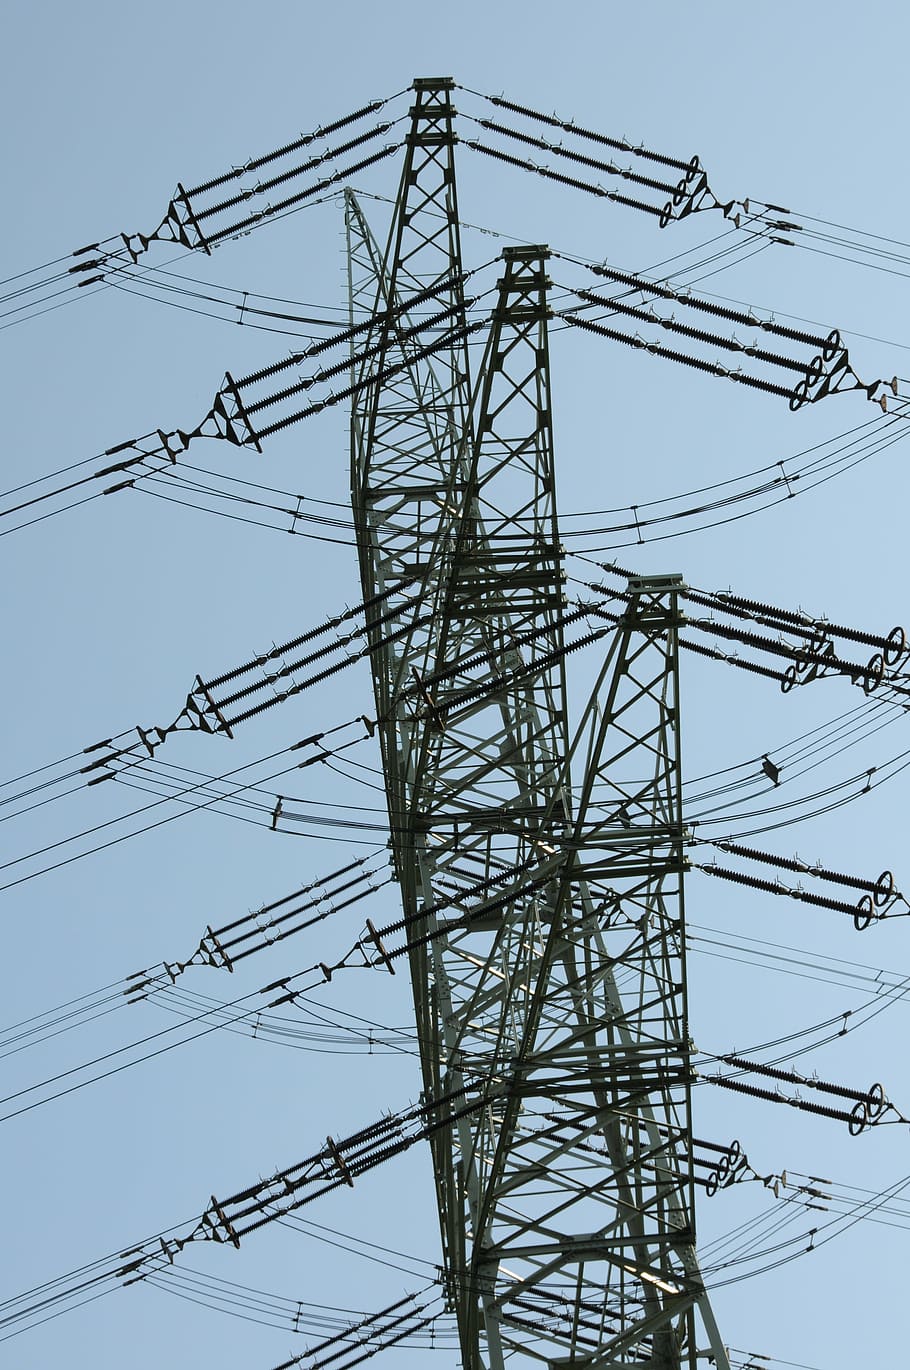 strommast, landline, energy revolution, pylon, grid expansion, power supply, electricity, technology, cable, low angle view